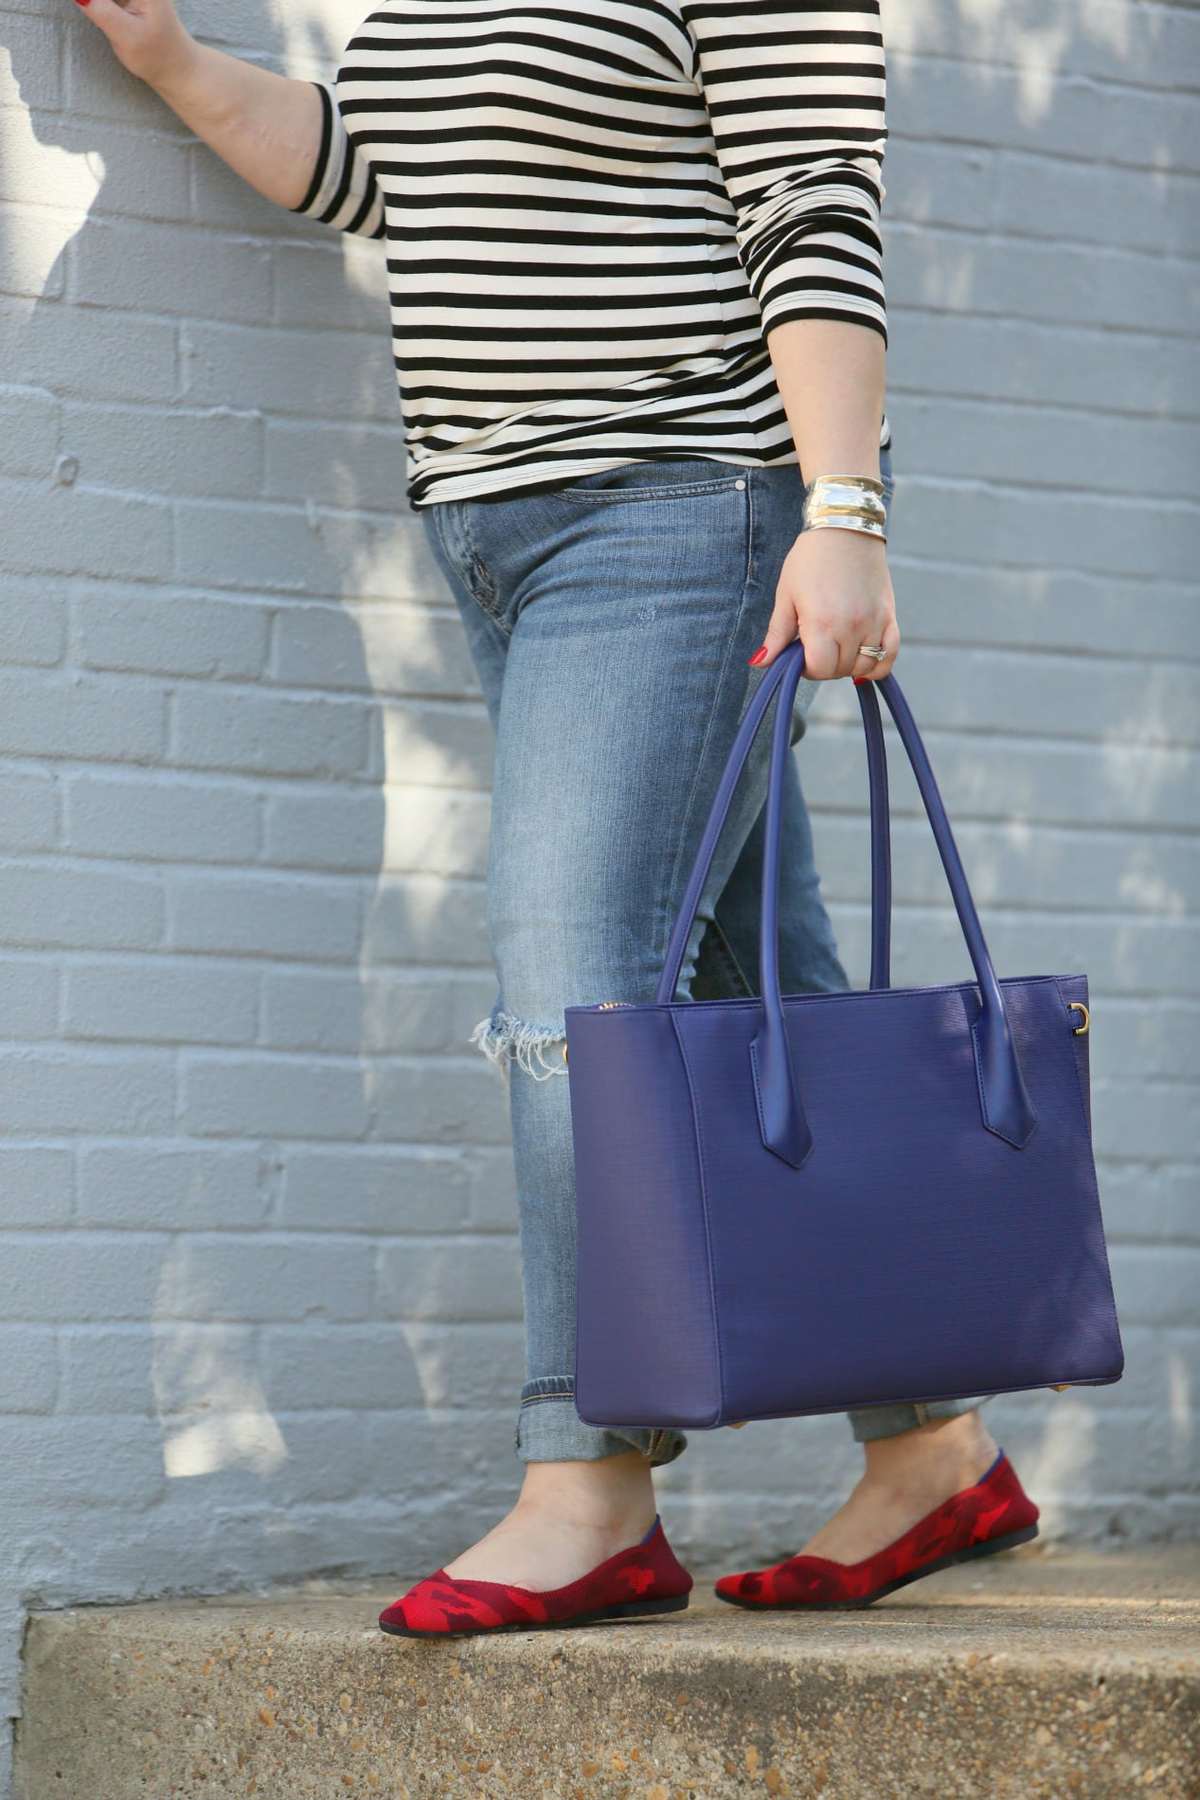 A review of the Dagne Dover Legend Tote, how it hols up, and how it compares to the Allyn Tote - Dagne Dover Tote Legend vs Allyn review featured by popular Washington DC fashion blogger, Wardrobe Oxygen